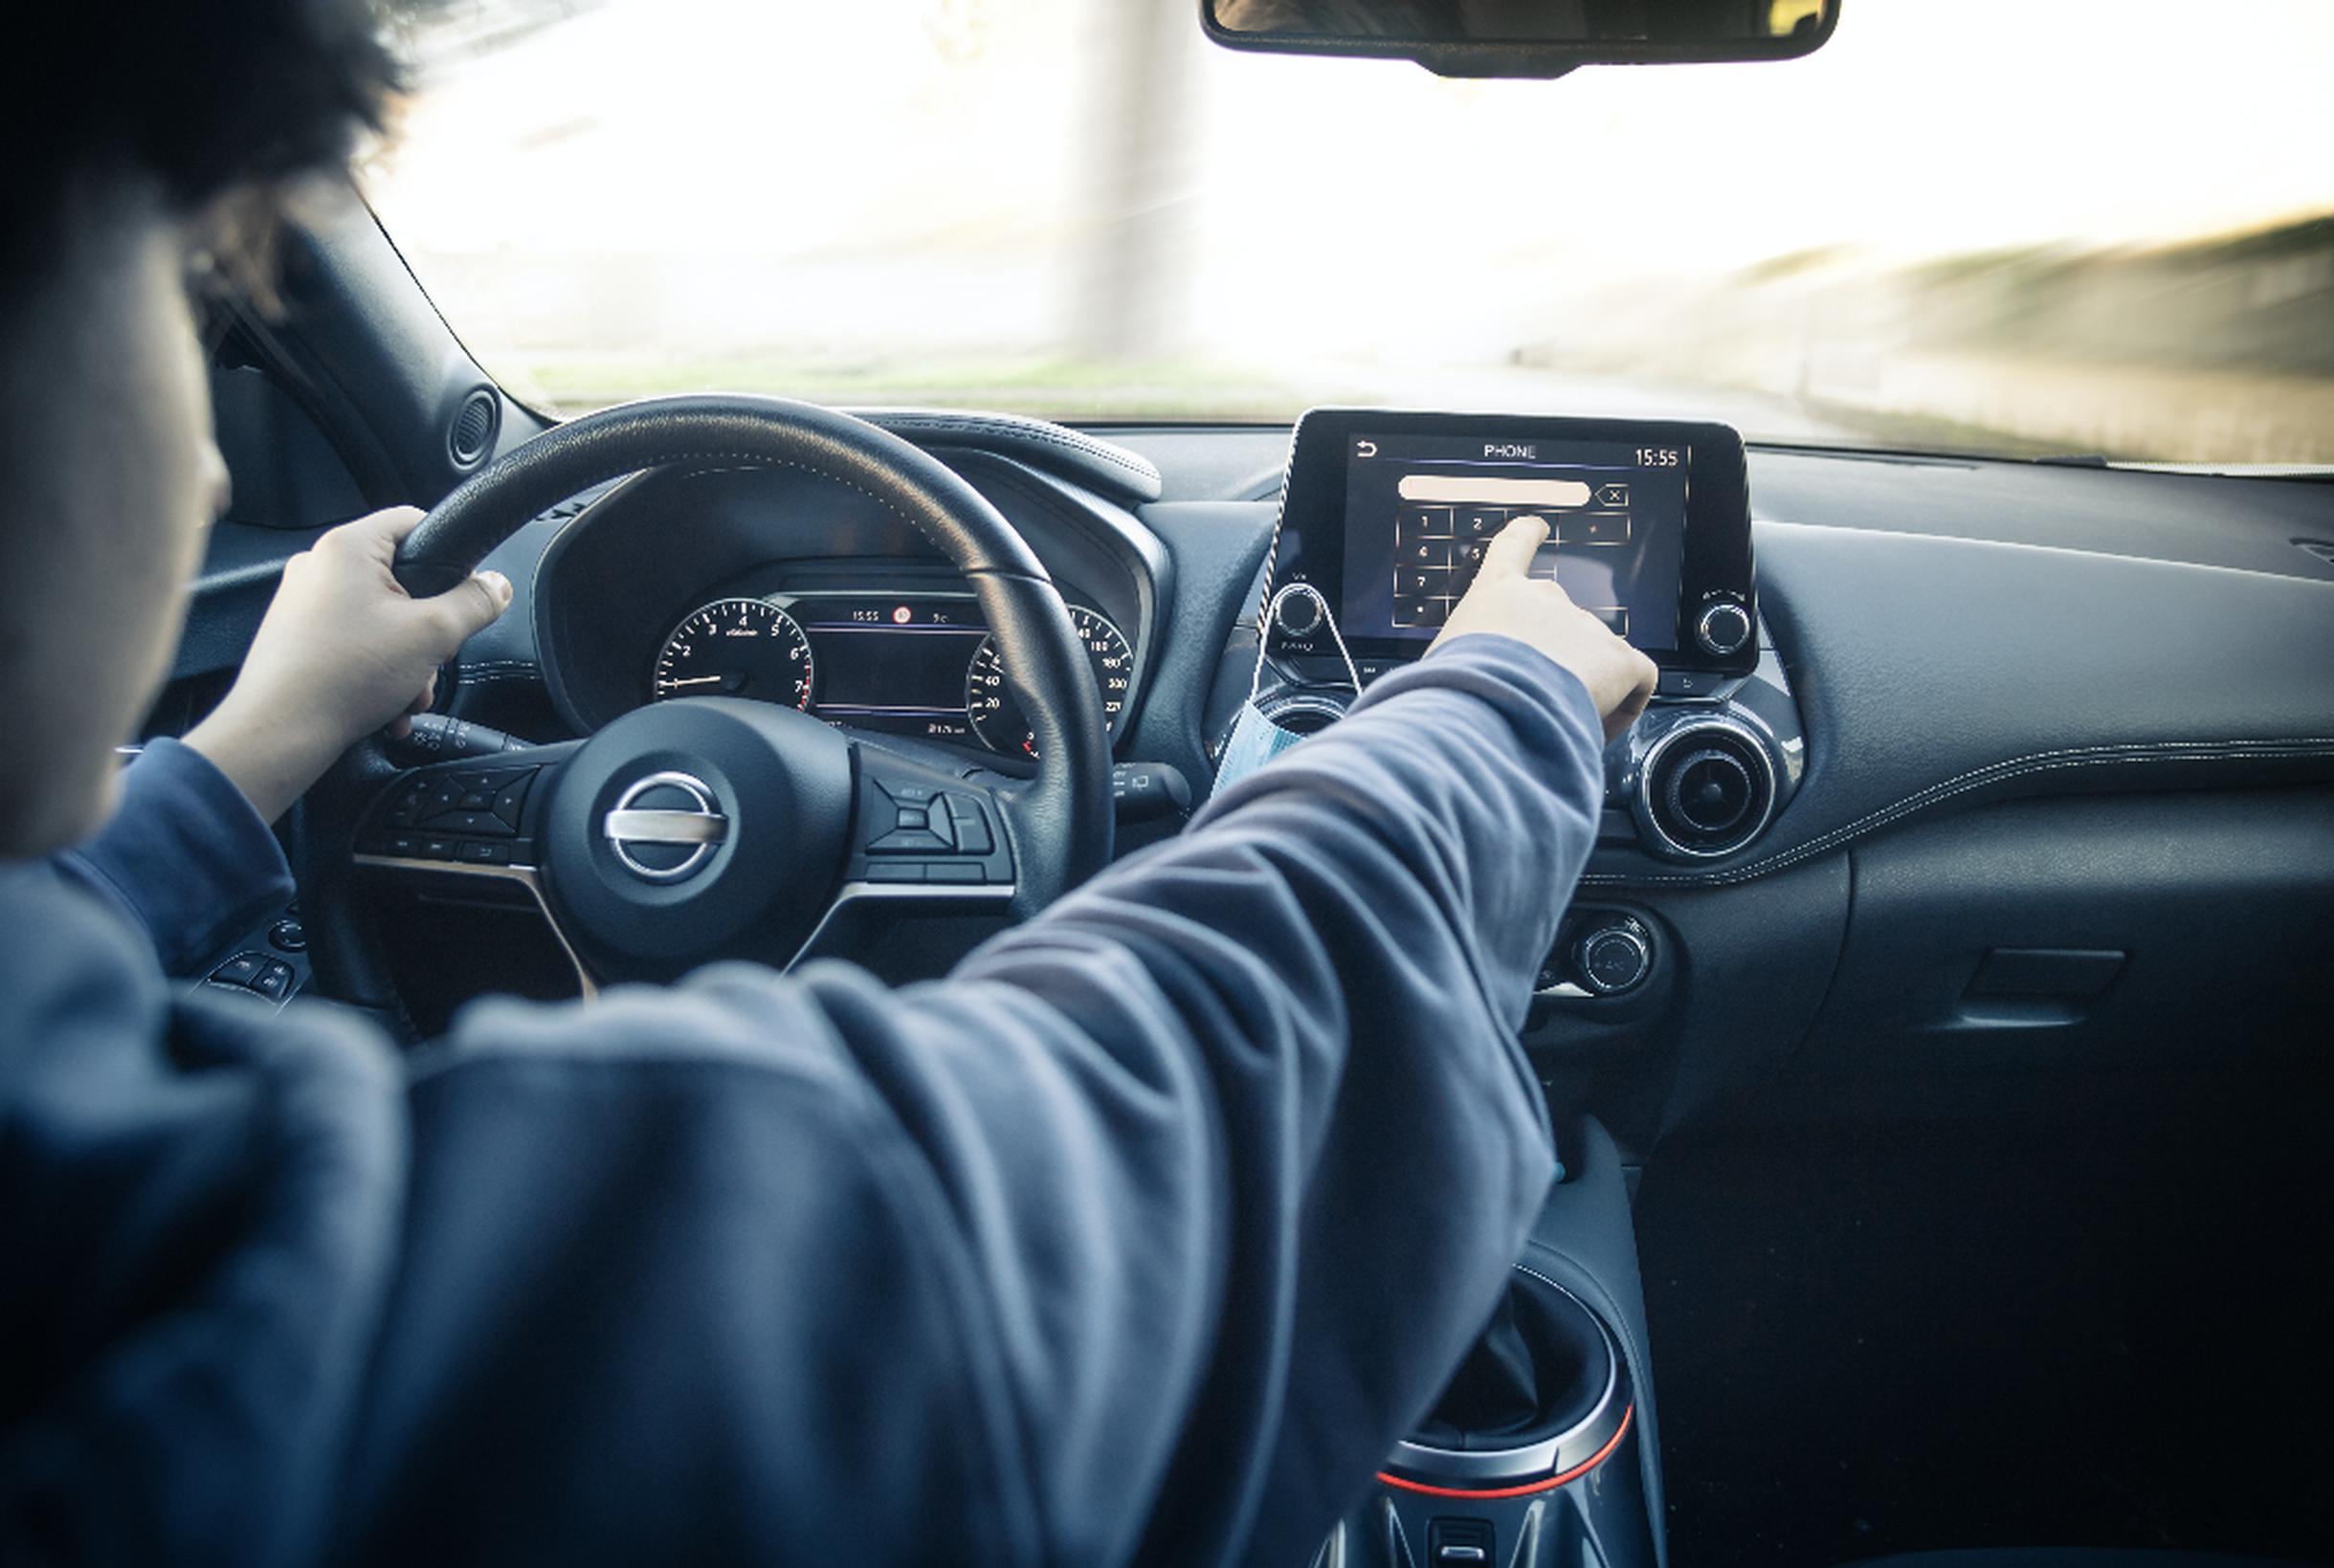 Competition for driver attention has never been greater. The roads are busier than ever, touchscreens dominate vehicle interiors, and we’re living increasingly connected lives. That means there are now many more opportunities for a driver’s focus to be elsewhere.